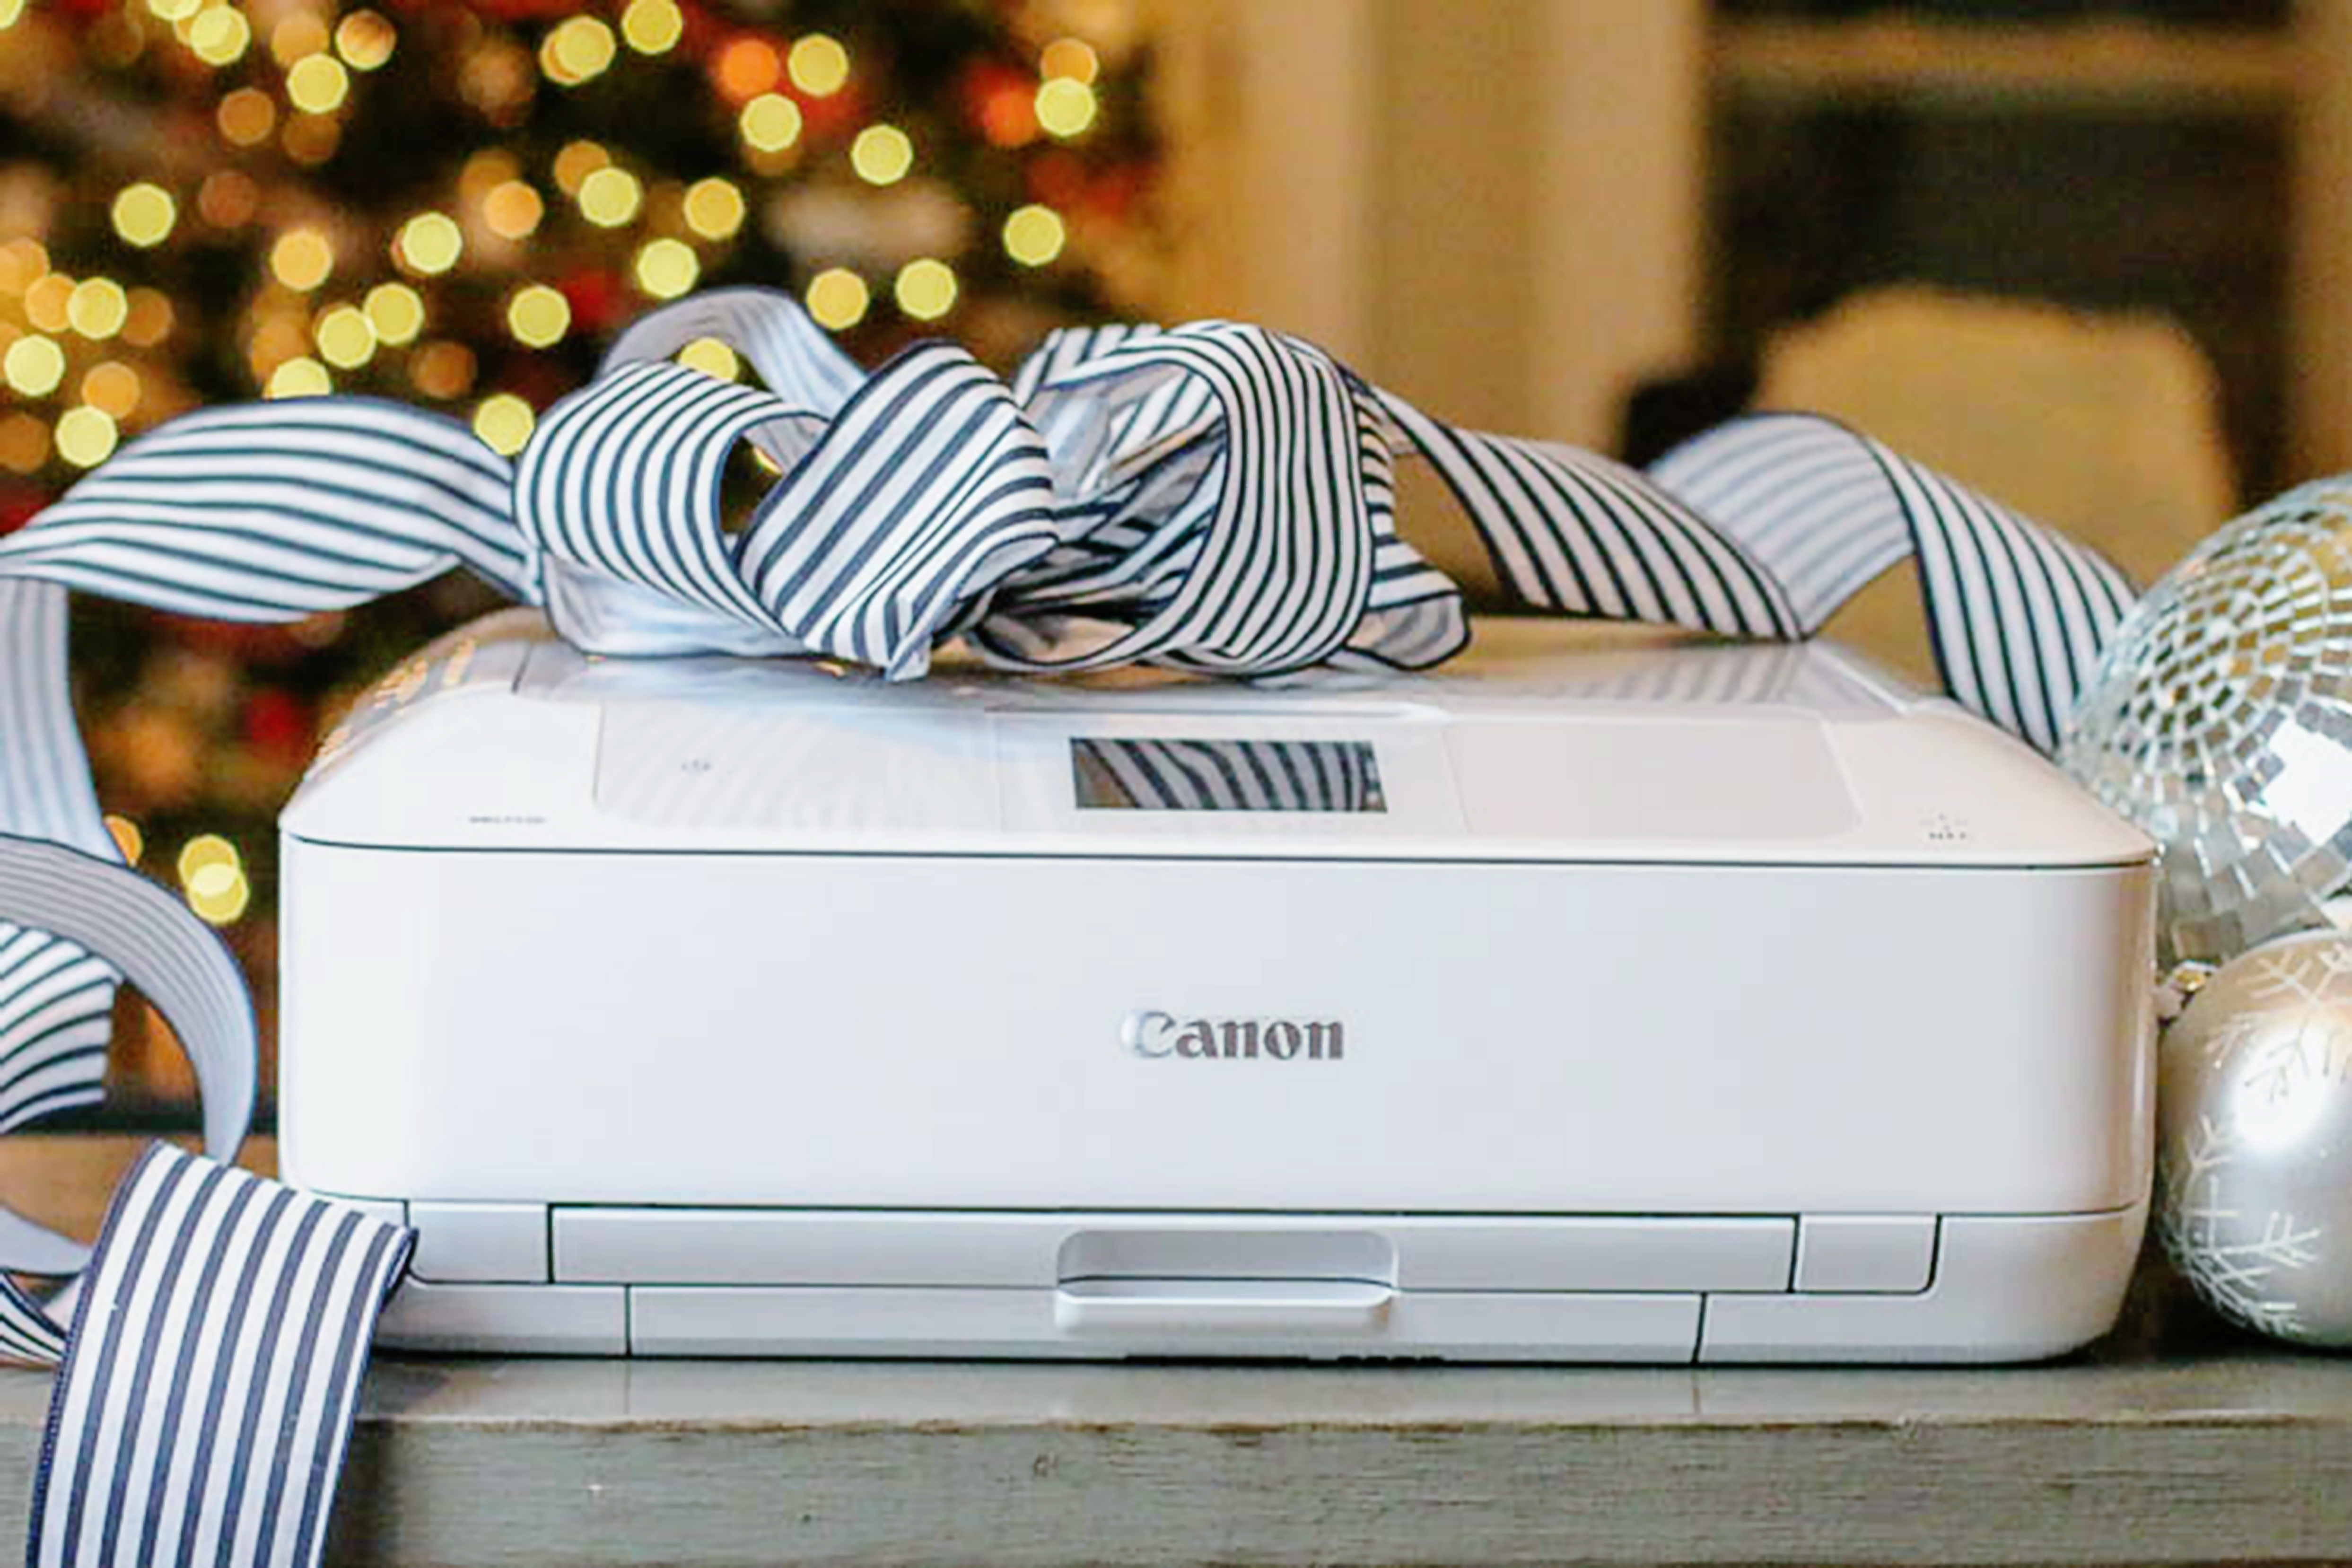 Canon Crafting Printer Giveaway